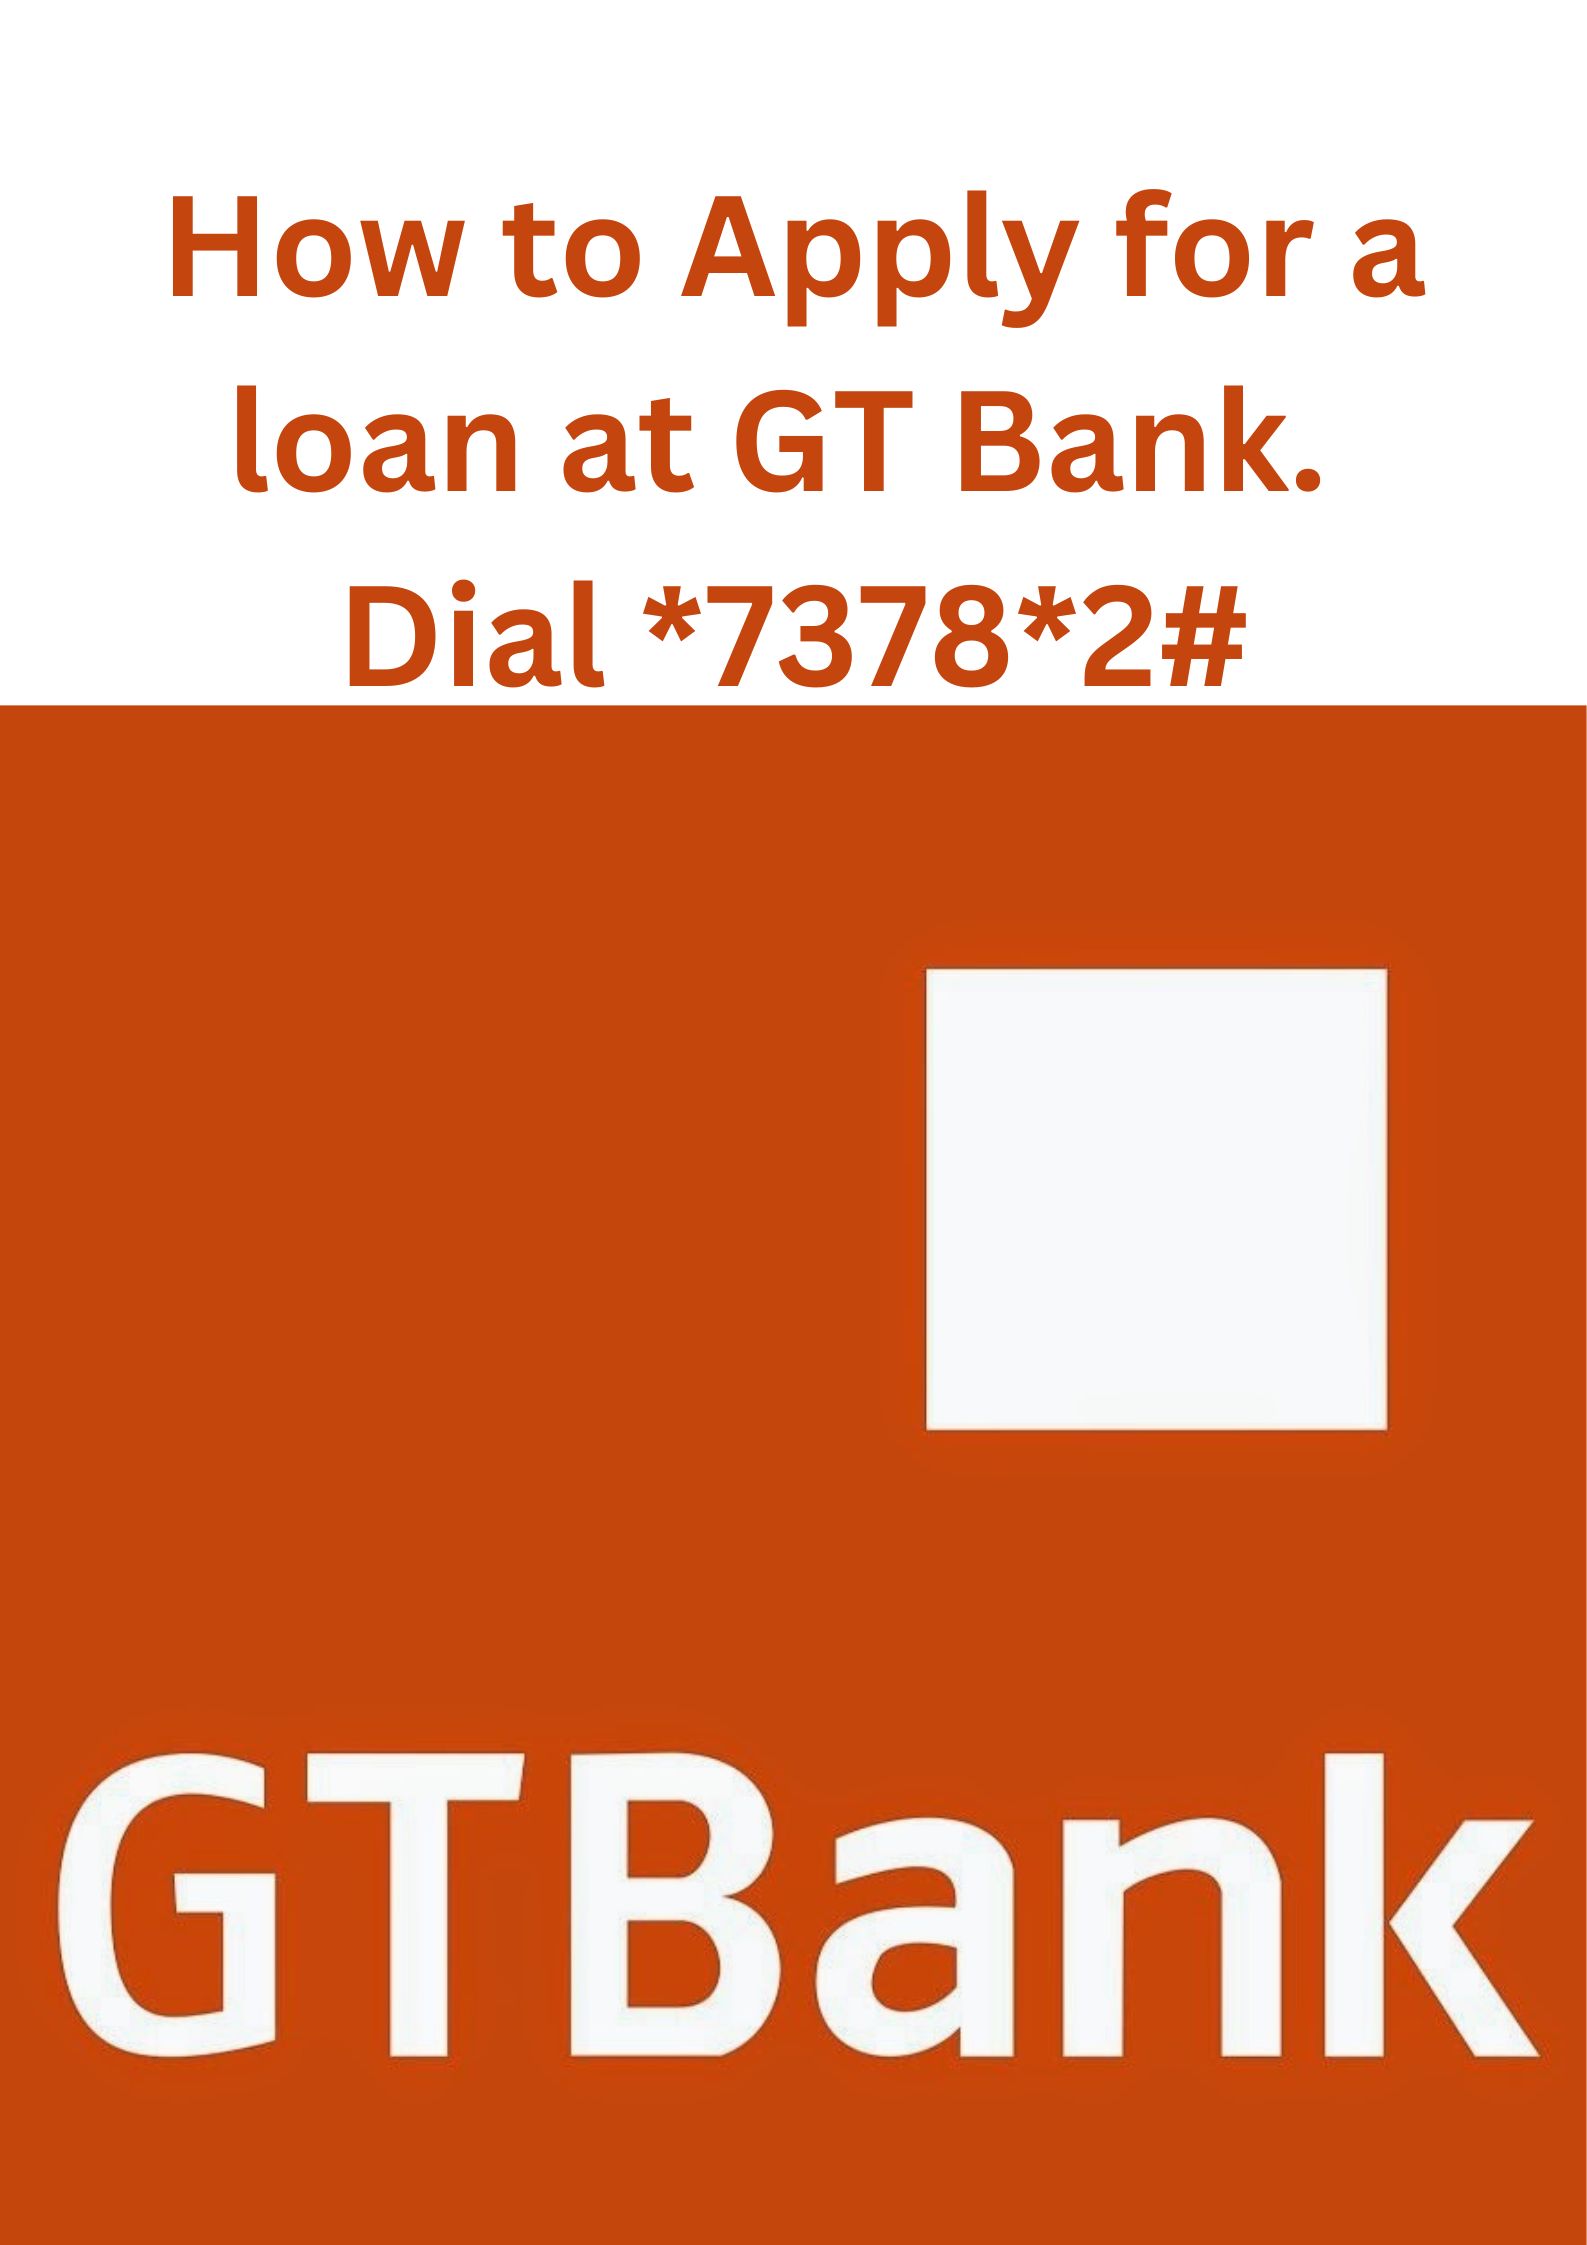 How To Apply For Loan In GT Bank: Requirements, Procedures